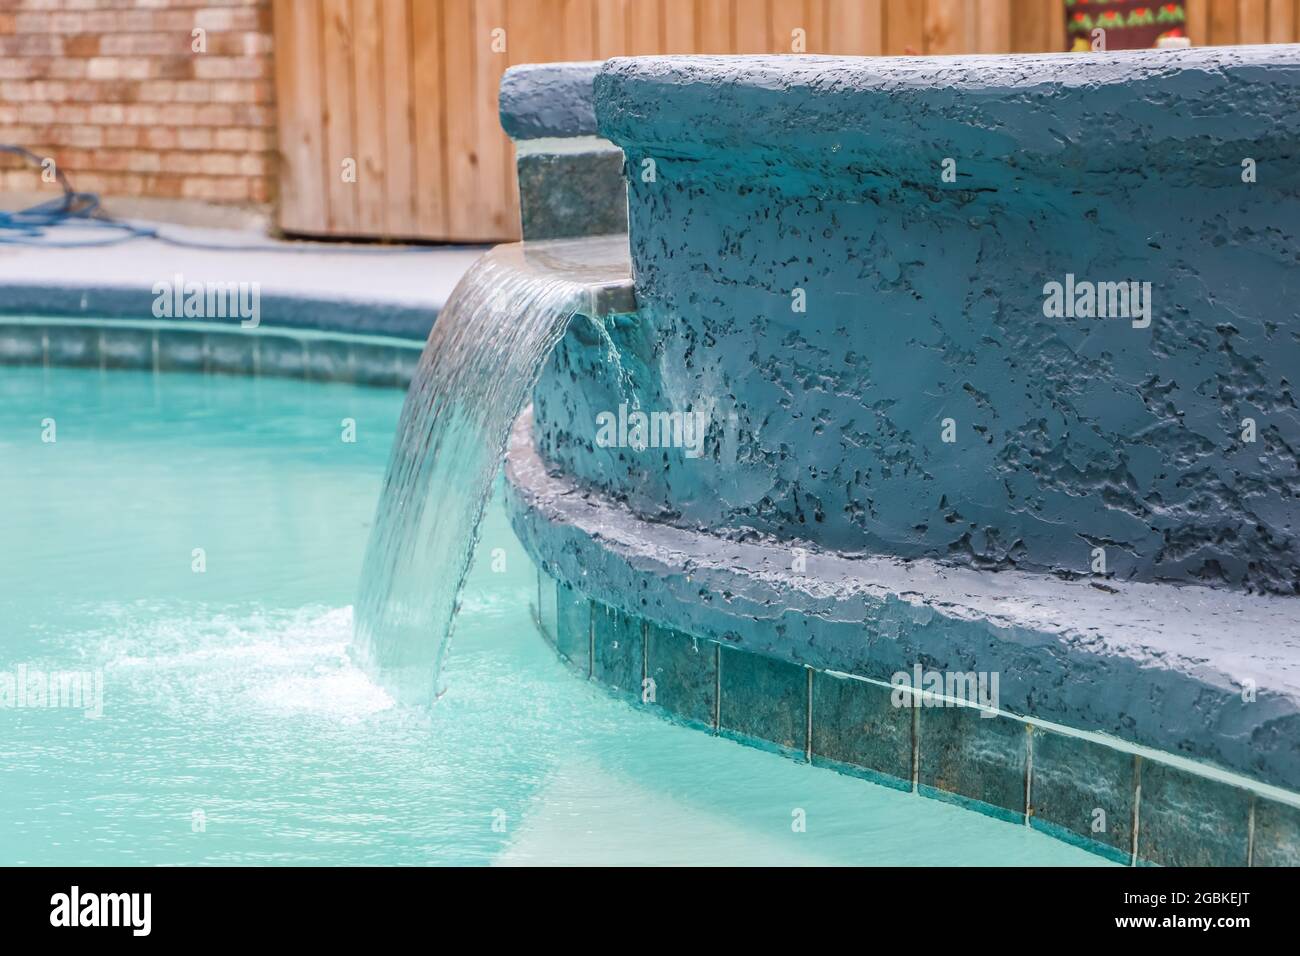 A jacuzzi hot tub next to a large freeform swimming pool with a waterfall water feature running Stock Photo